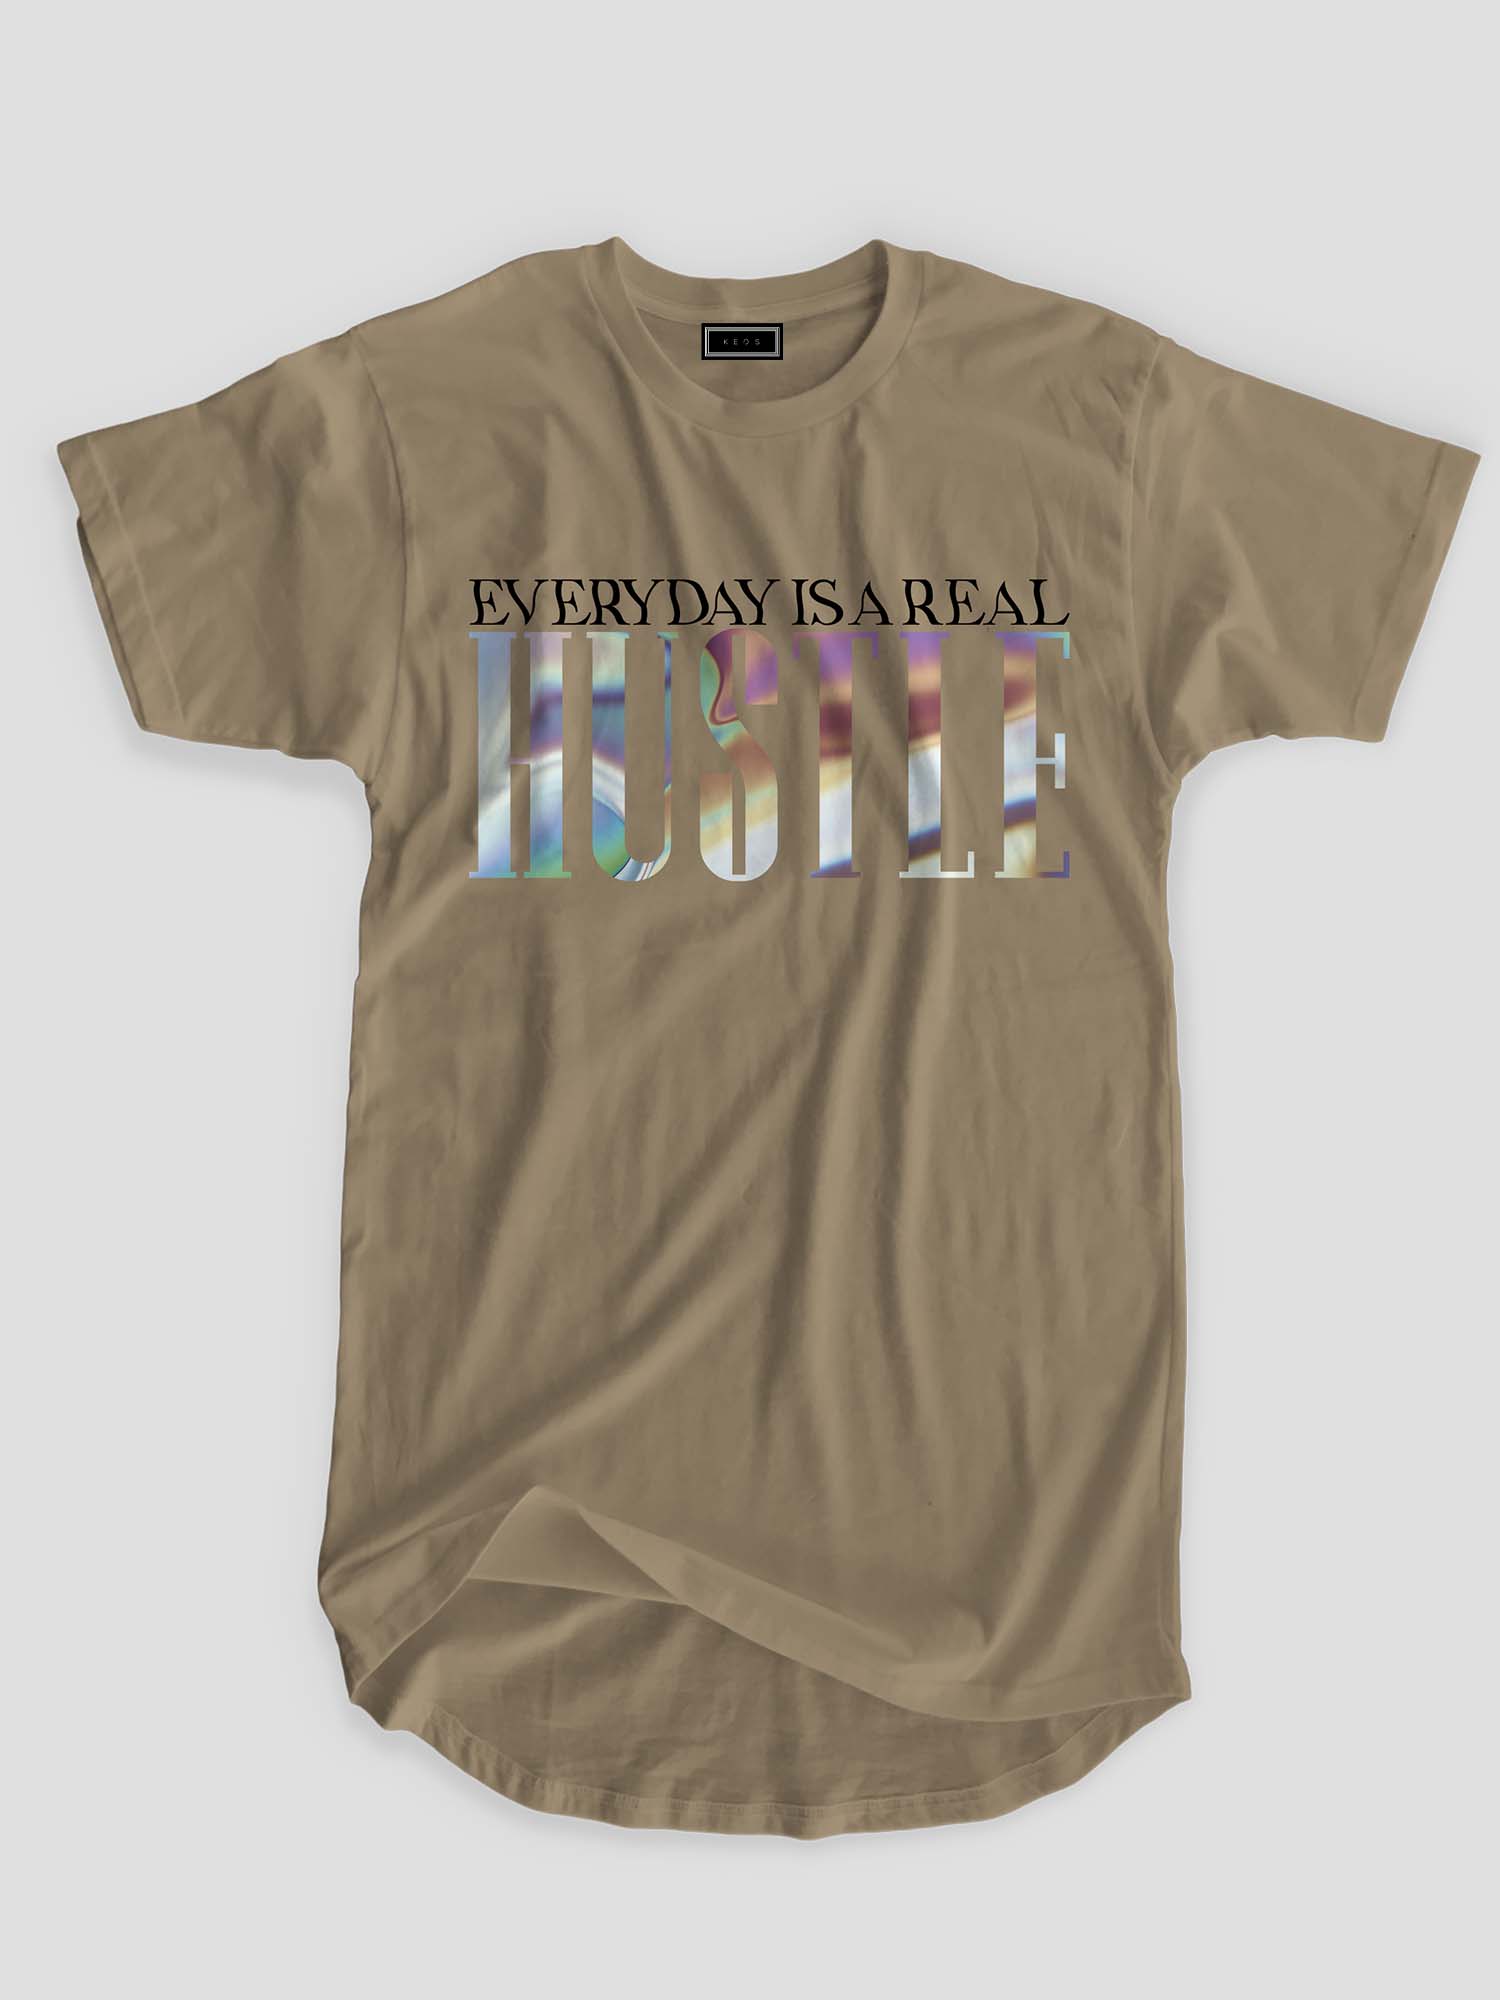 Longline Everyday is a real Hustle Organic Cotton T-shirt - keos.life